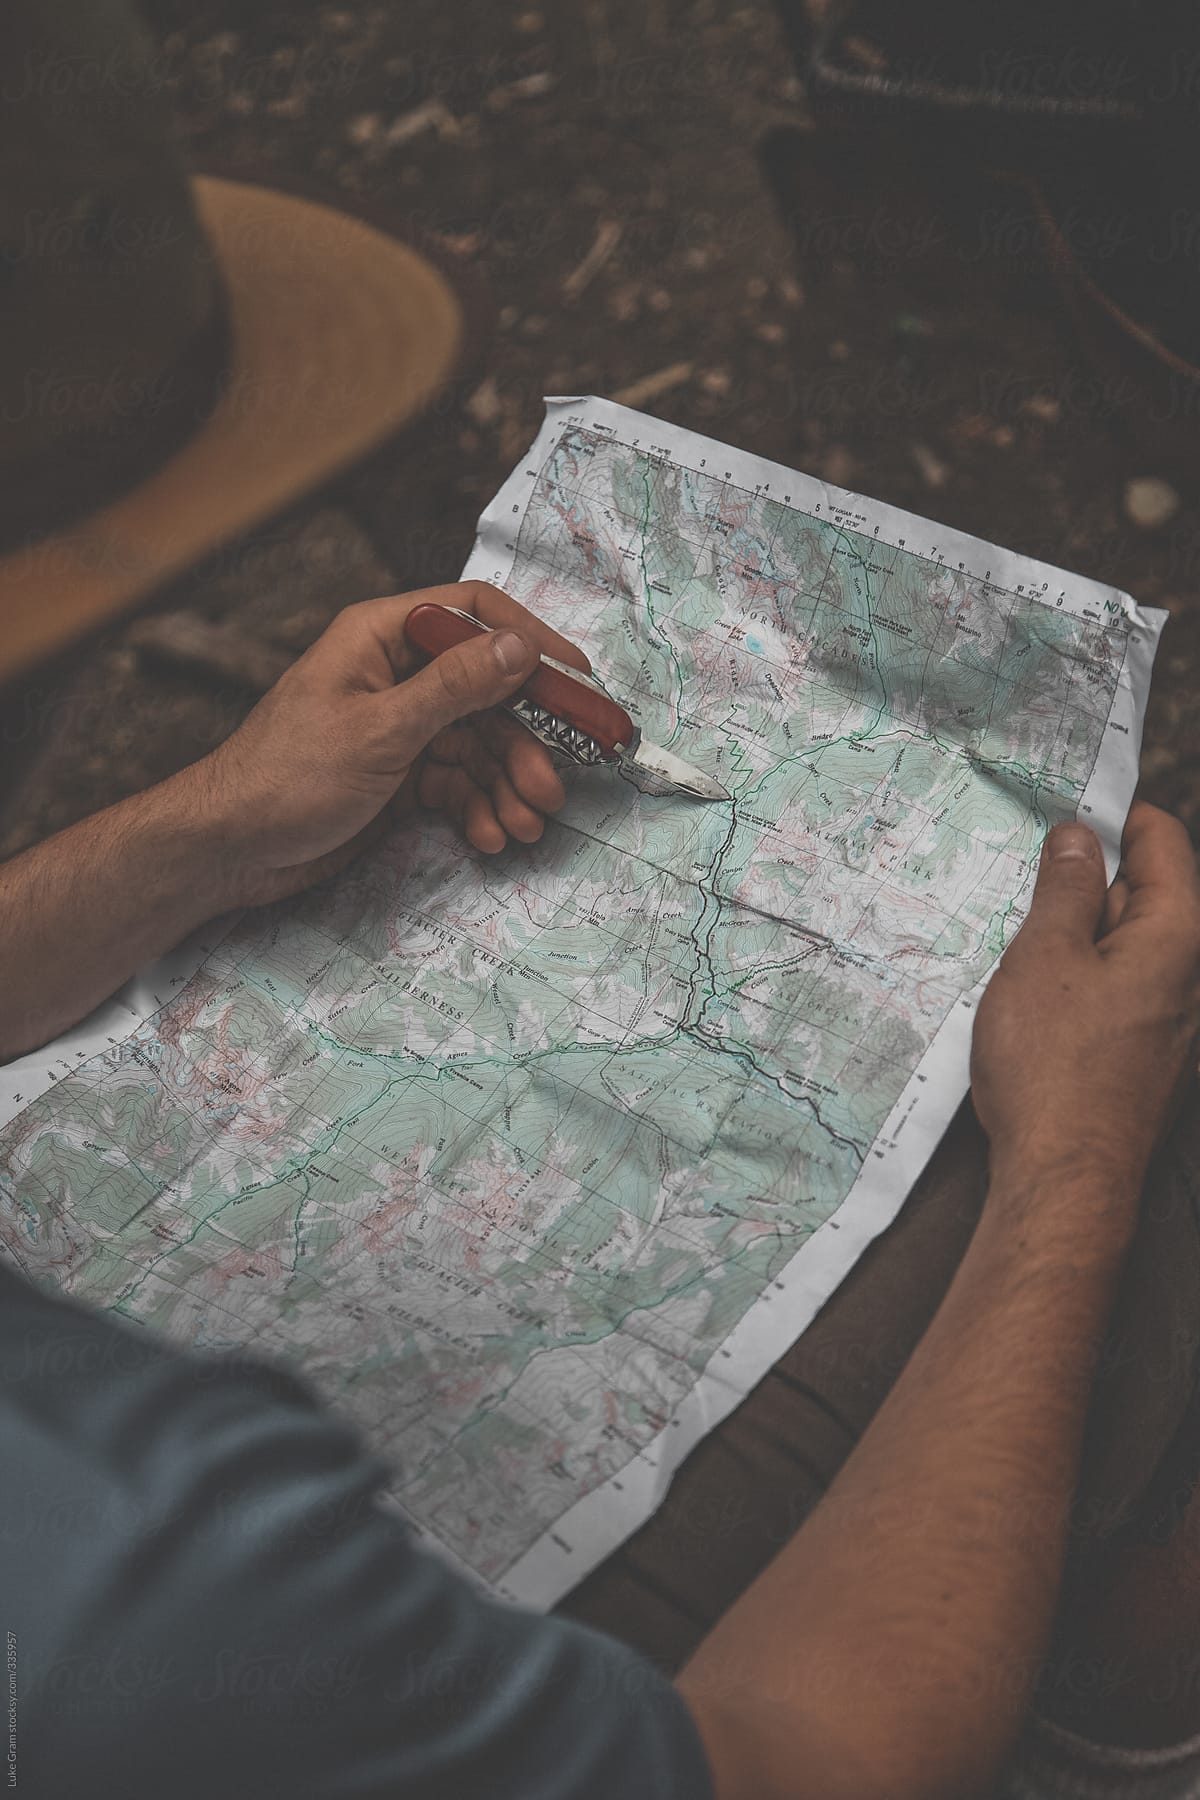 Man plotting a hiking route with a map and knife